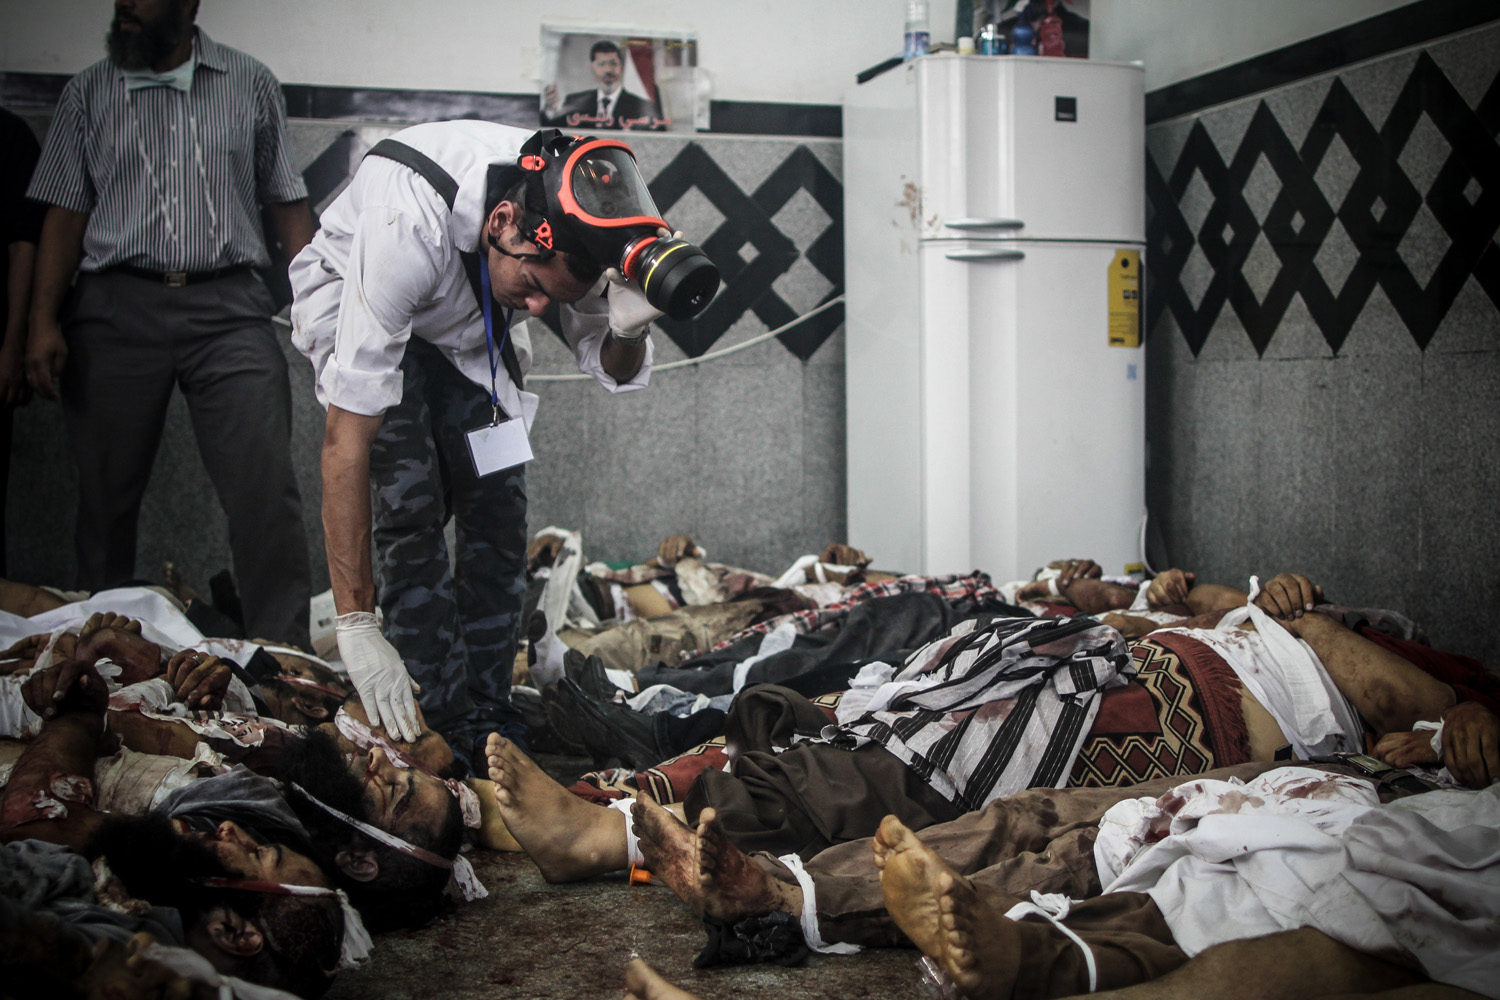 Aug. 14, 2013. A doctor inspects bodies of Morsi supporters laid at a makeshift morgue in Rabaa Adaweya square during the violent dispersal of the camp by security forces.